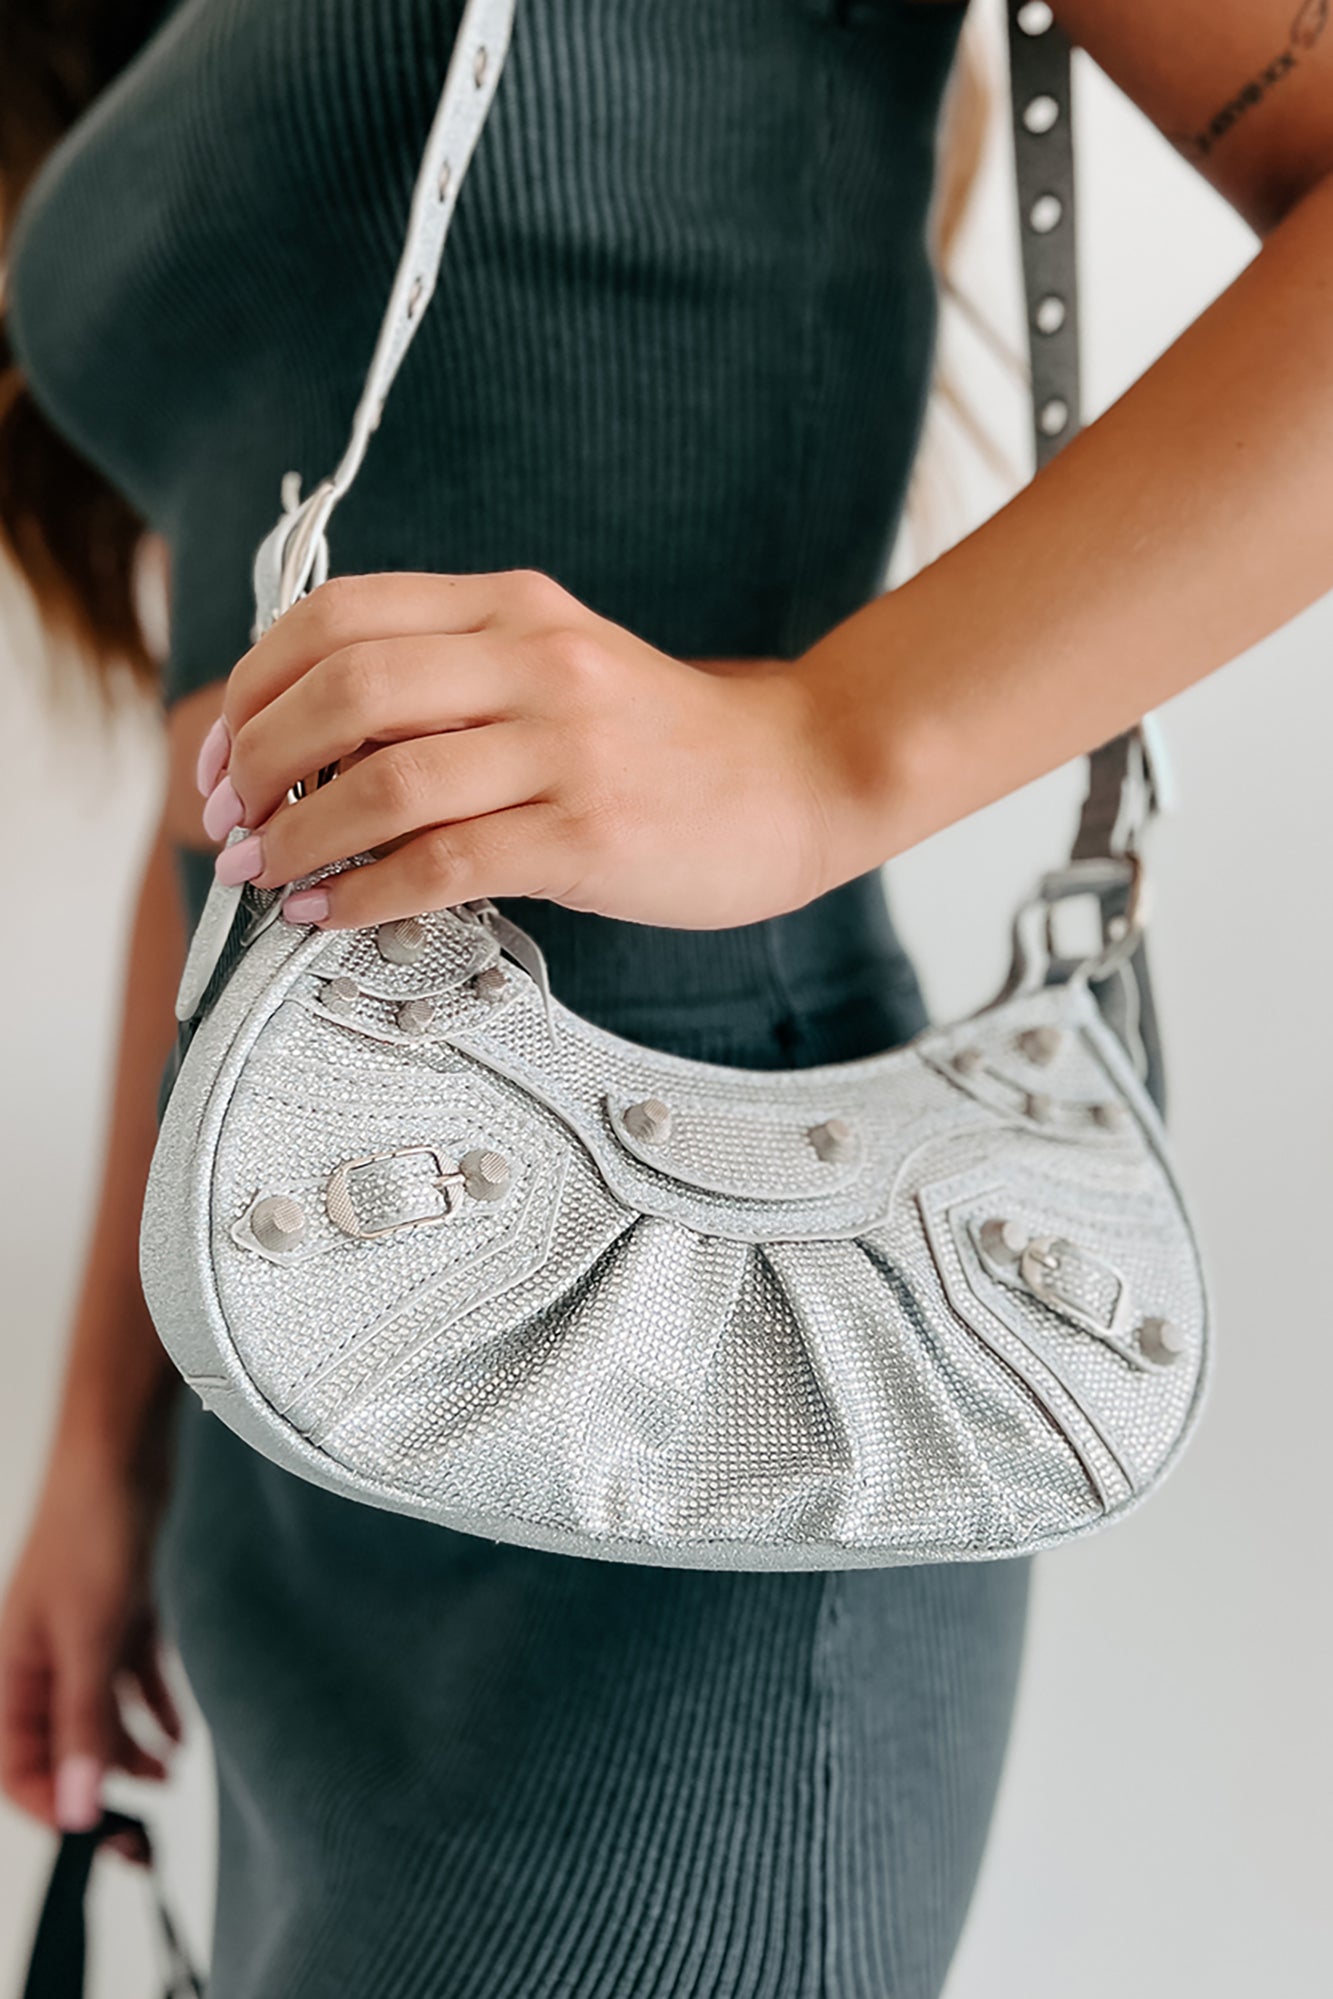 Silver Clutch Bags & Evening Bags for Special Occasions | Accessorize UK